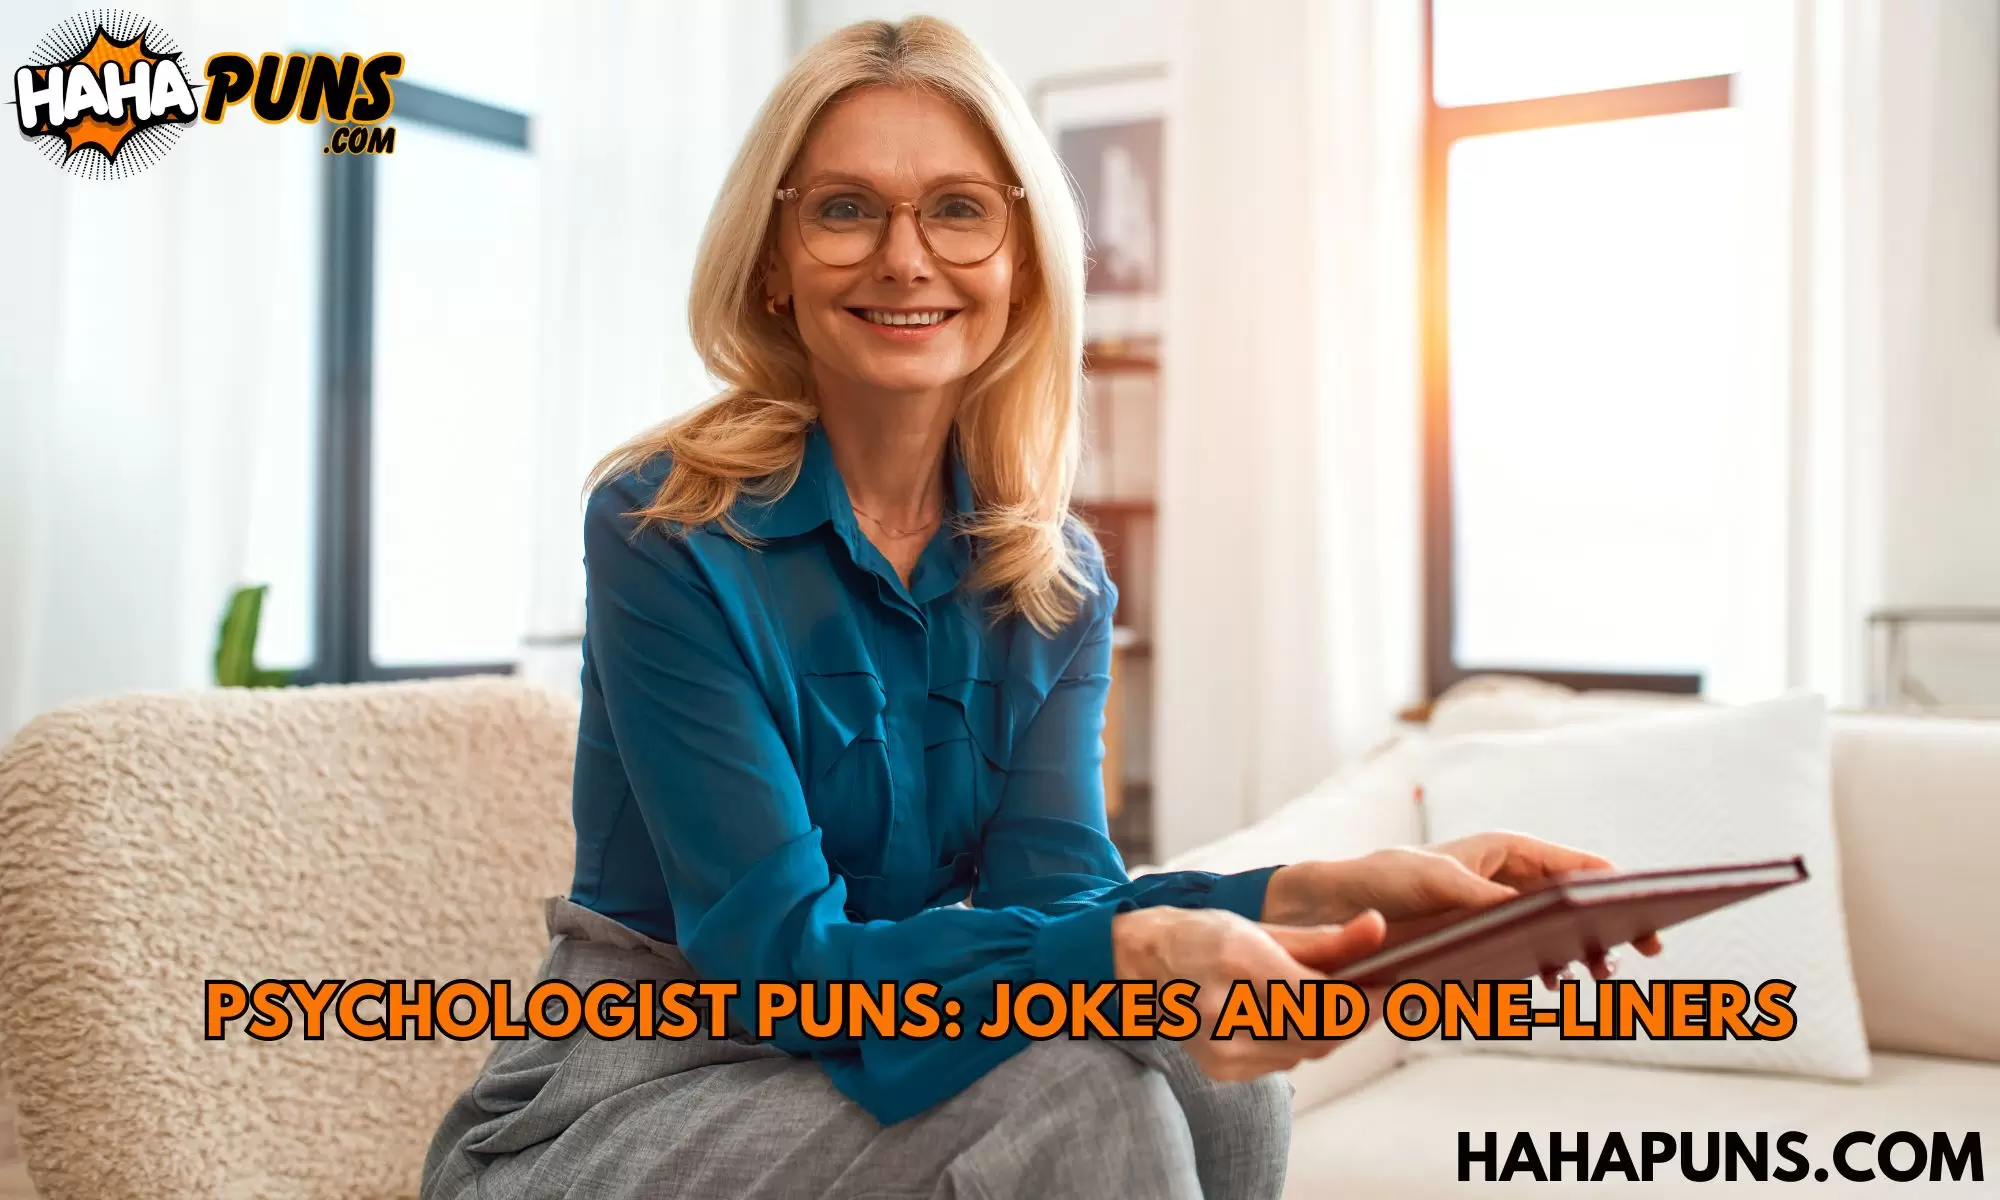 Psychologist Puns: Jokes And One-Liners